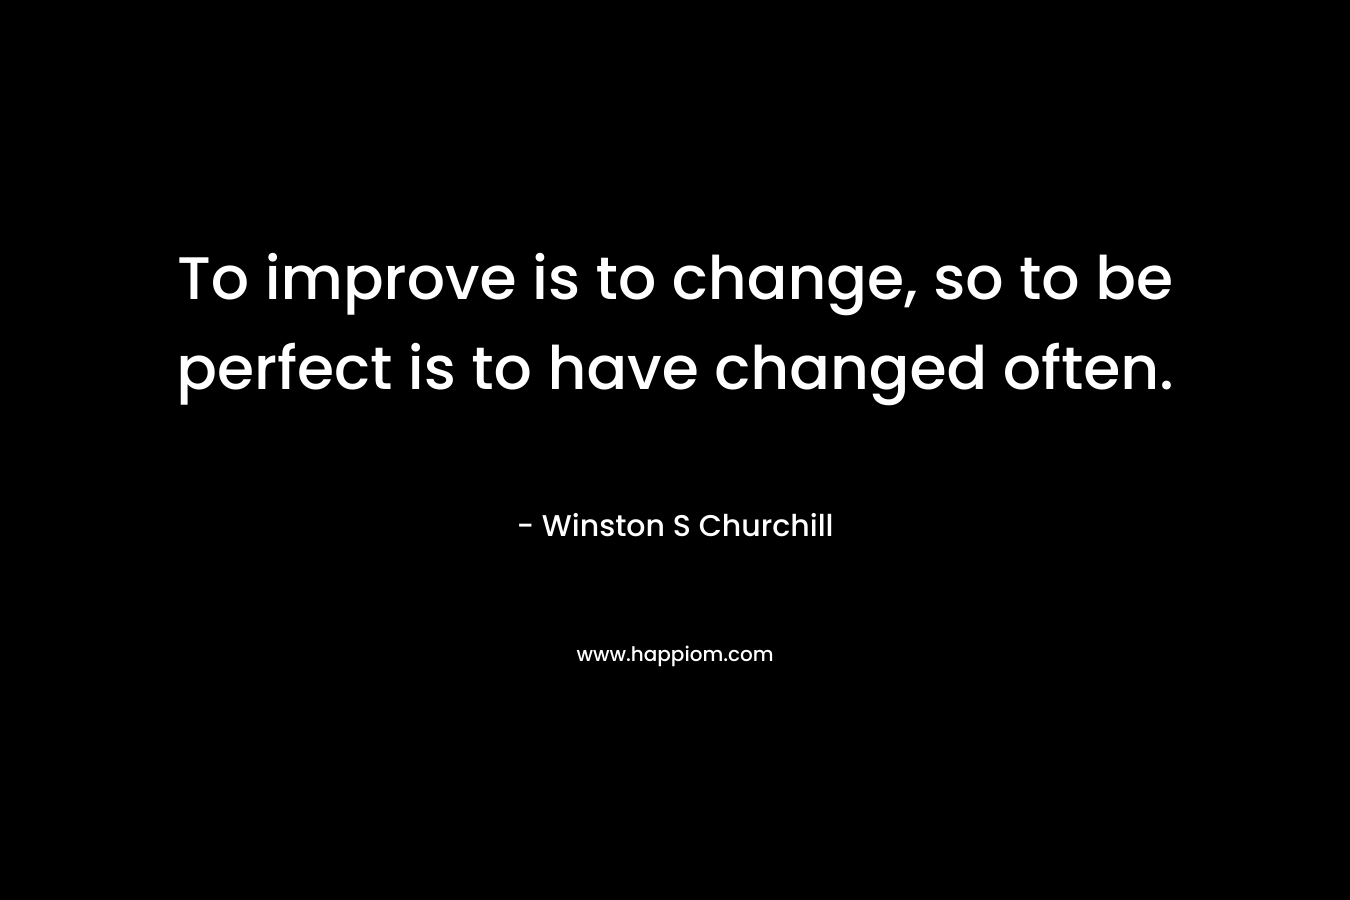 To improve is to change, so to be perfect is to have changed often.